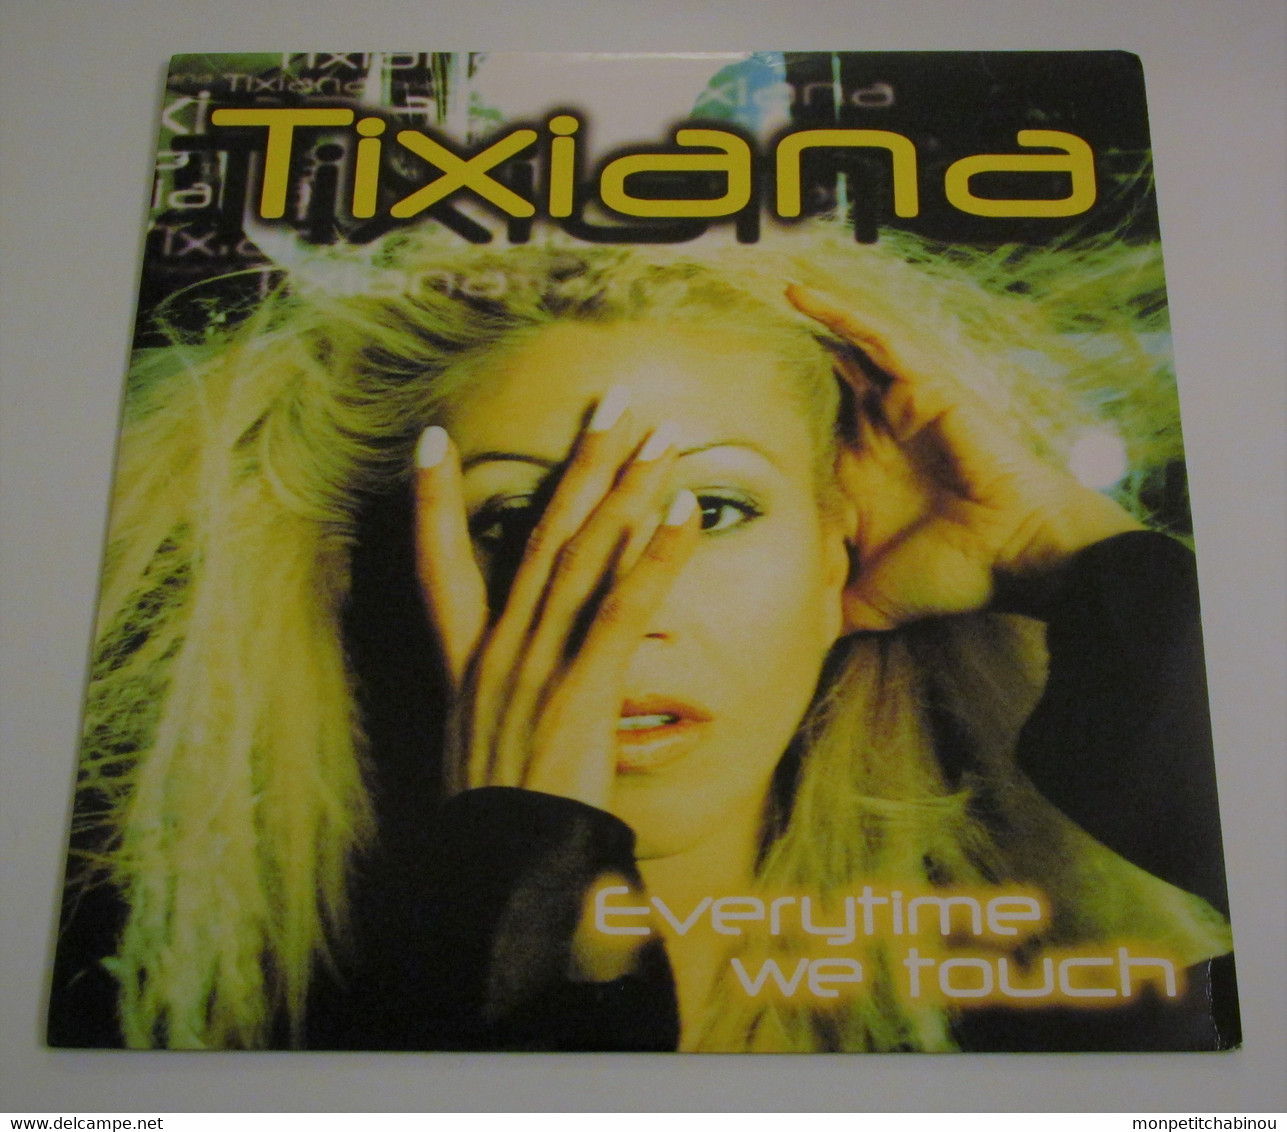 Maxi 33T TIXIANA : Everytime We Touch - Dance, Techno & House